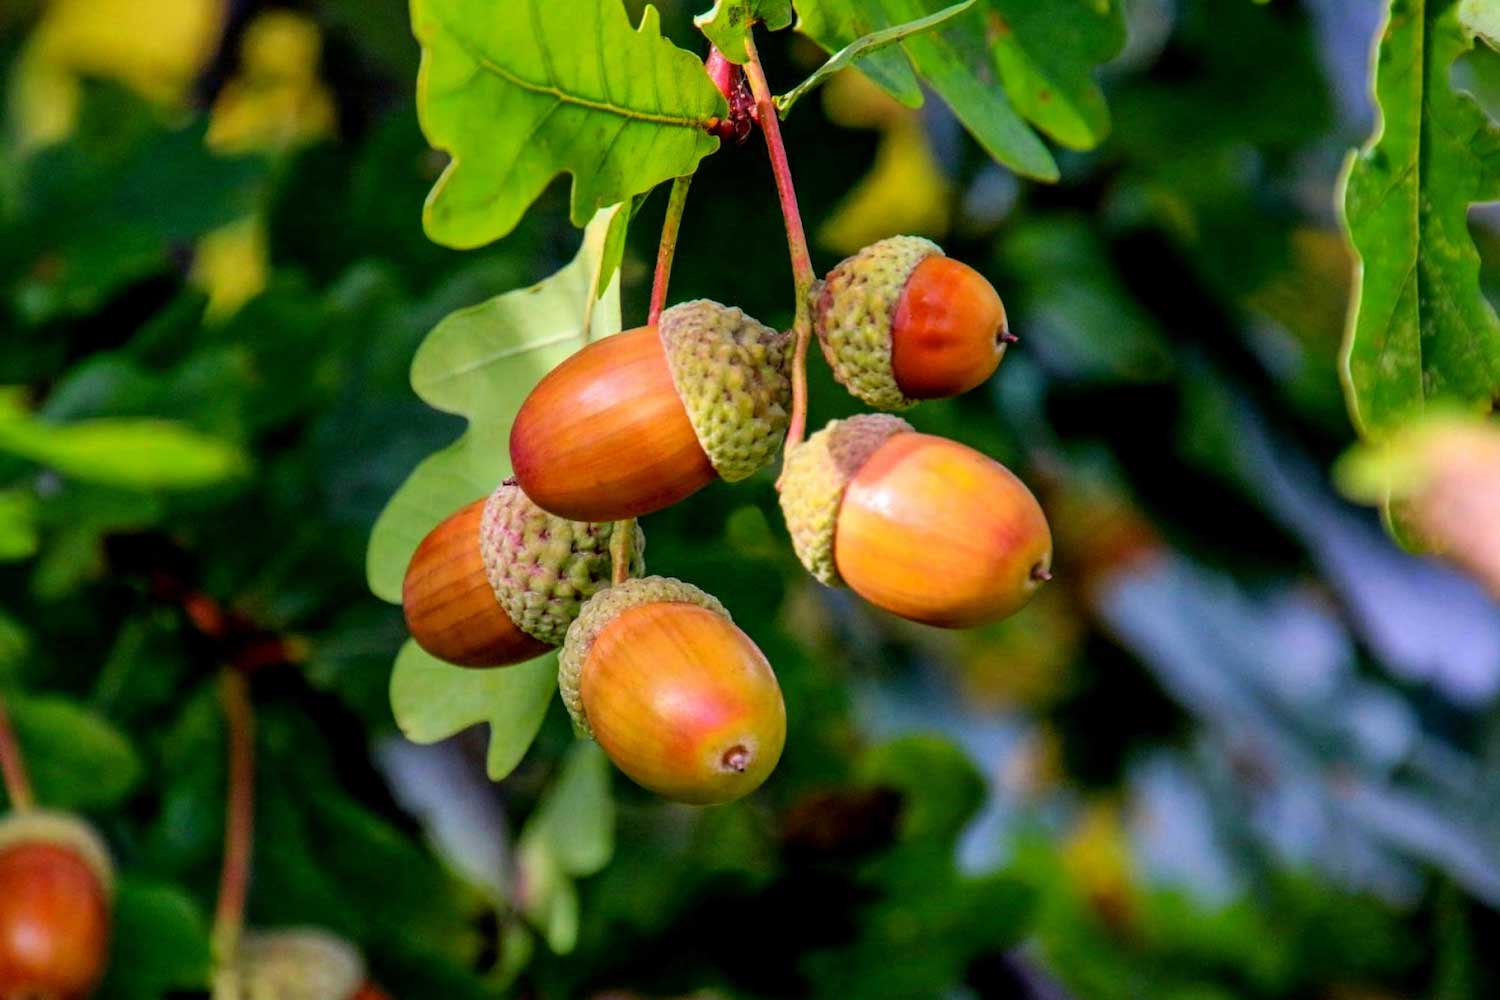 A group of acorns growing on a tree.